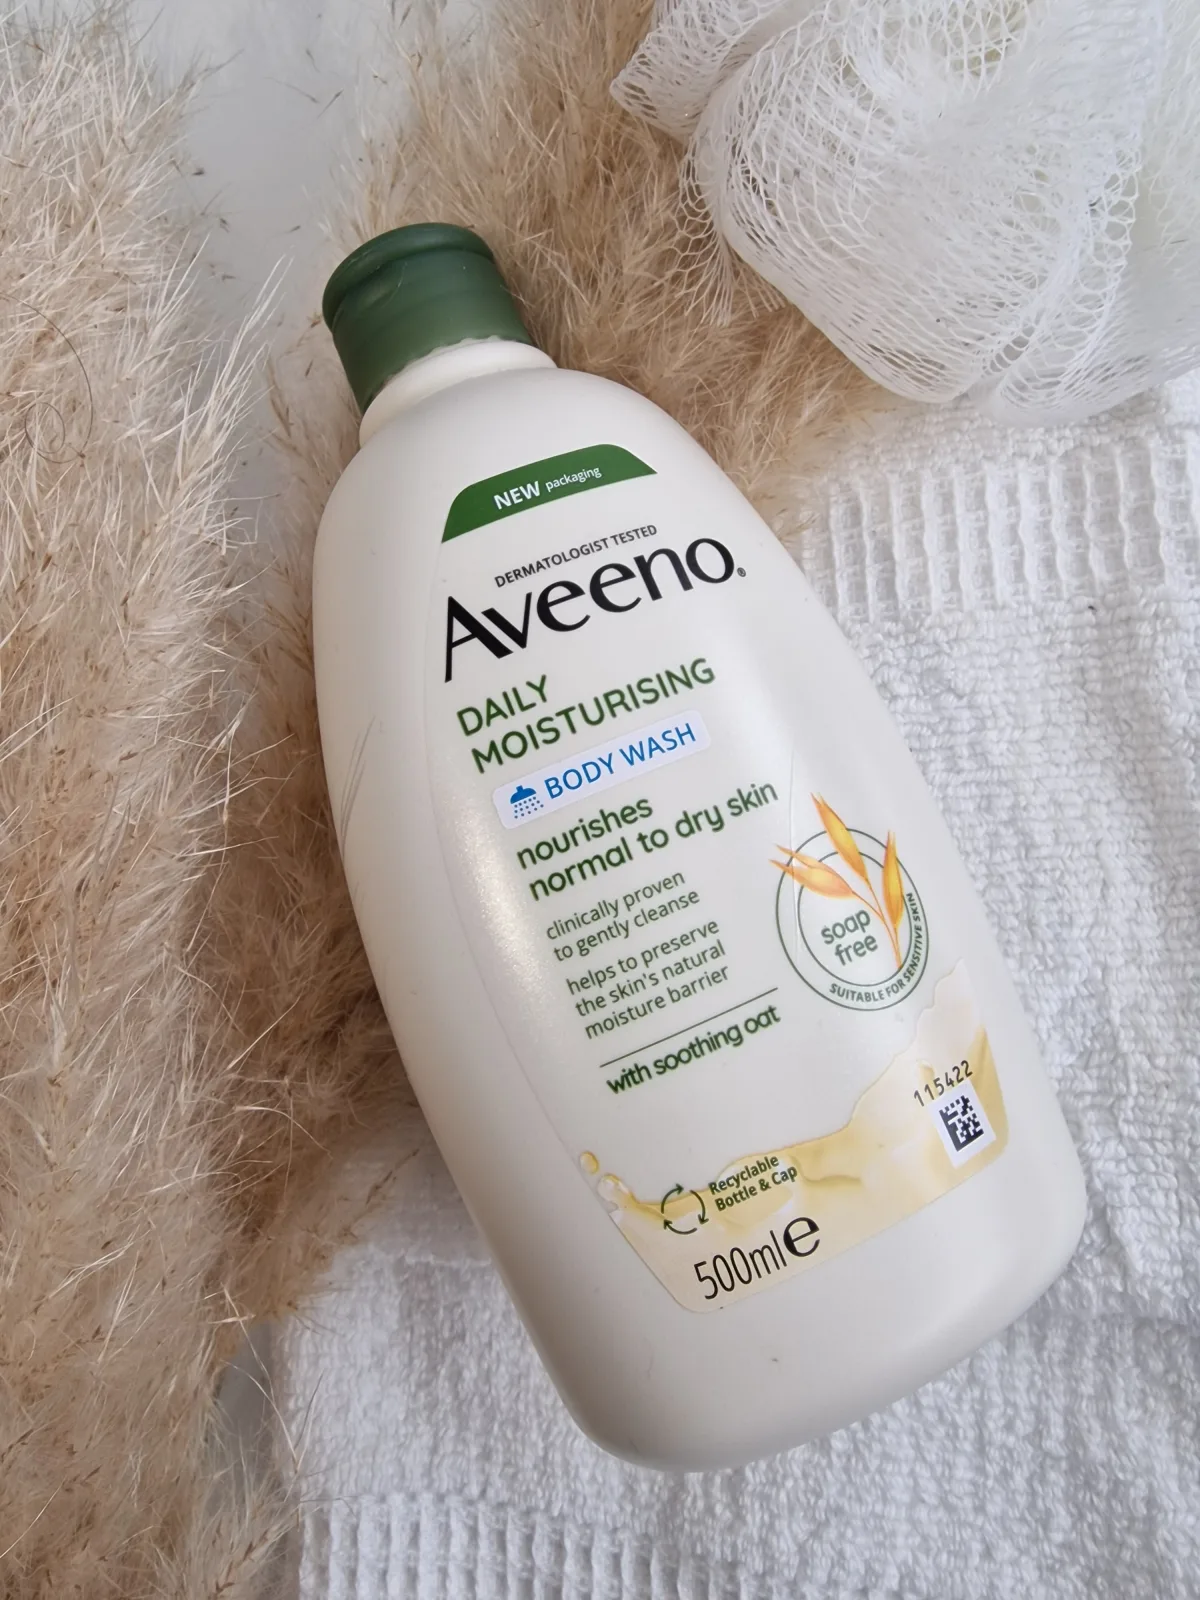 Aveeno Daily Moisturising Body Wash - 300 ml (voor normale tot droge huid) - review image